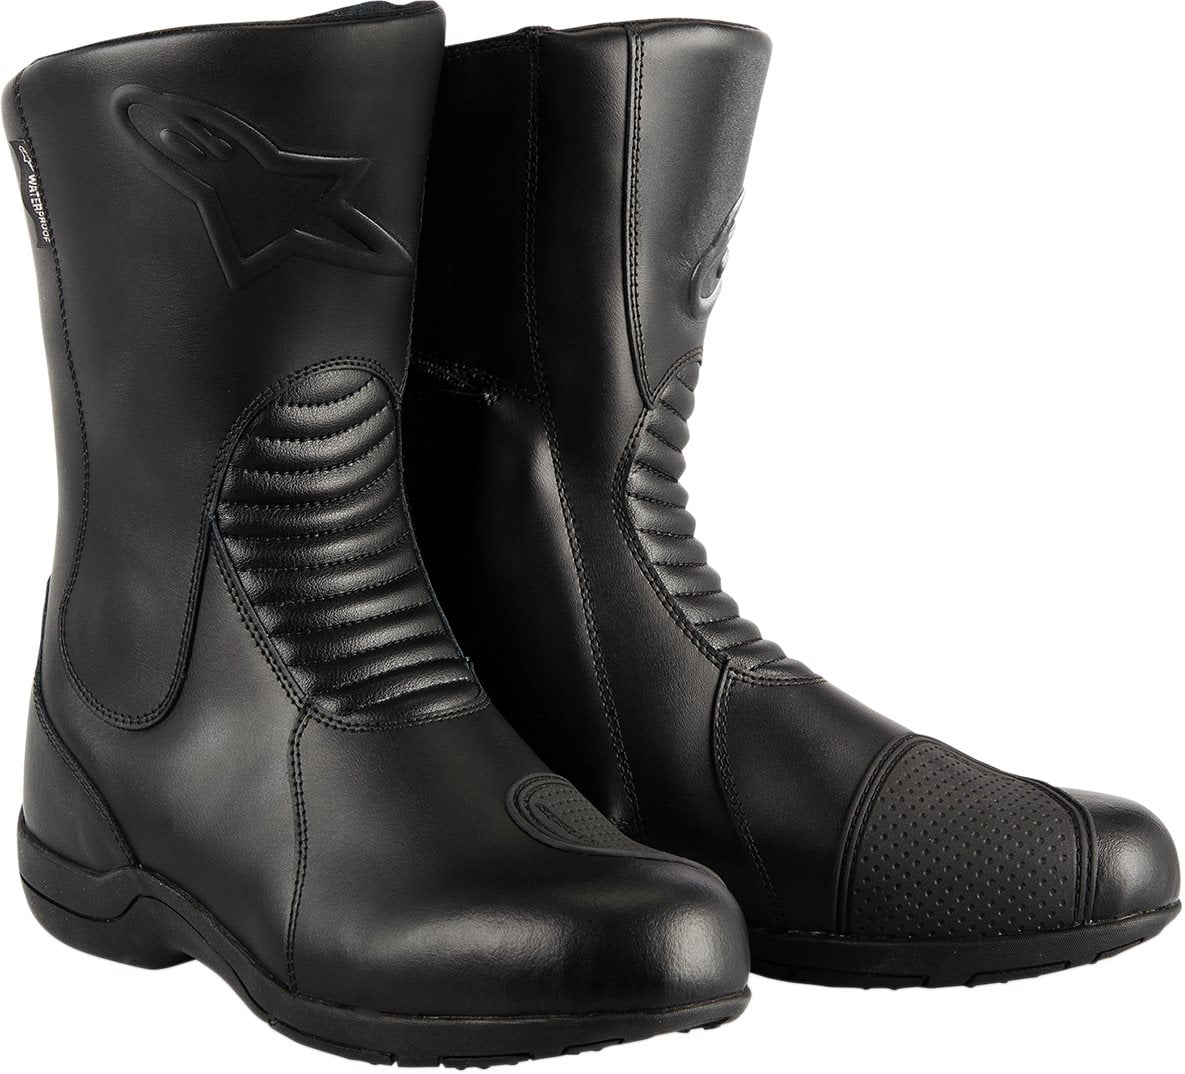 Buy > alpinestars andes boots > in stock